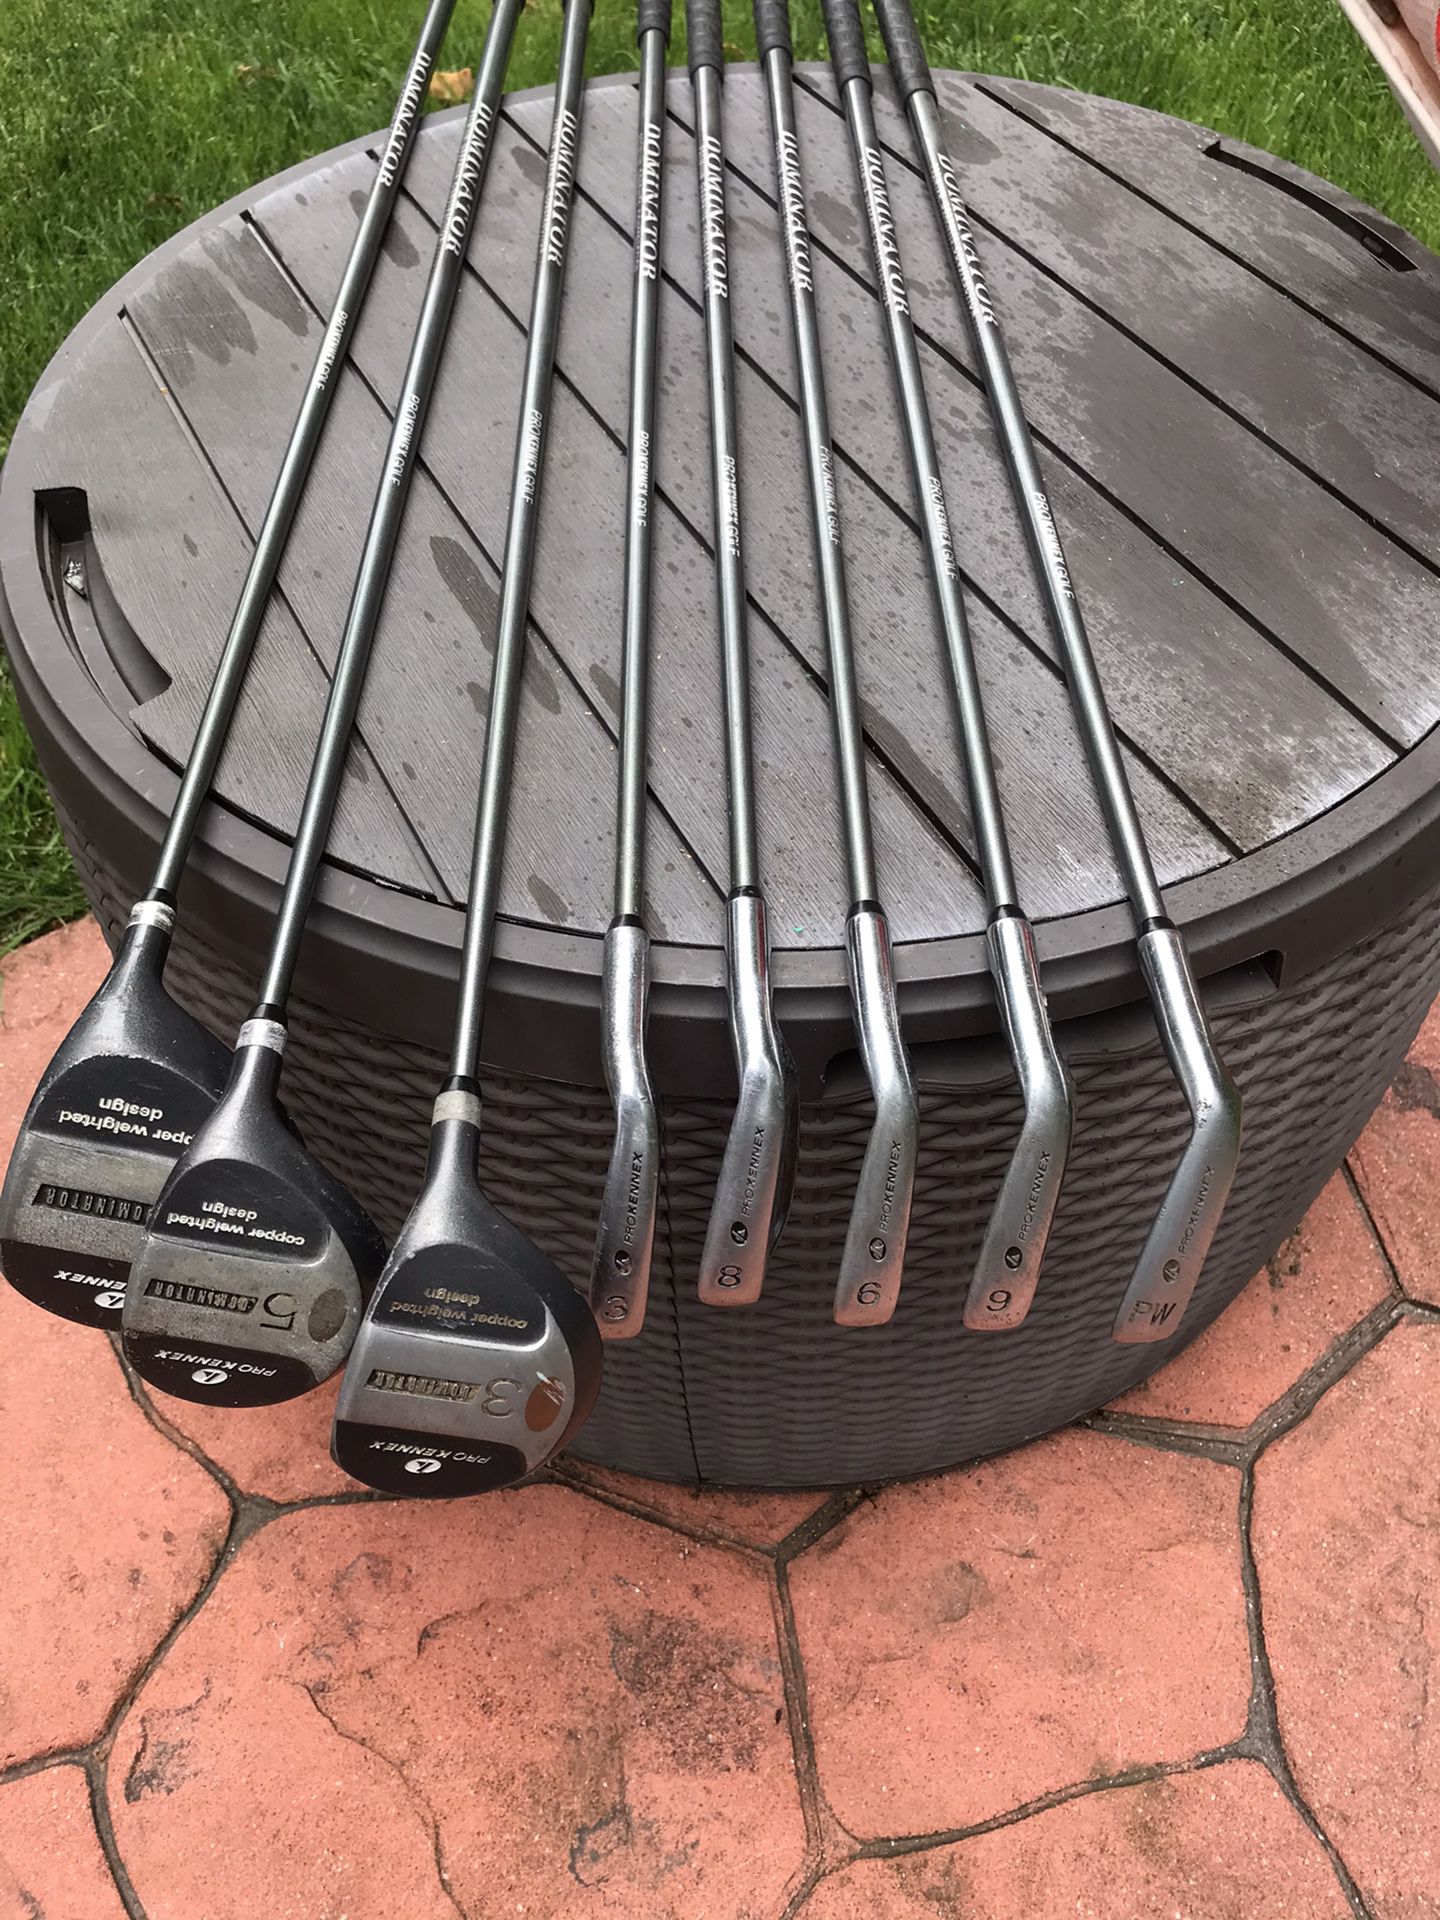 Great Set Of Irons